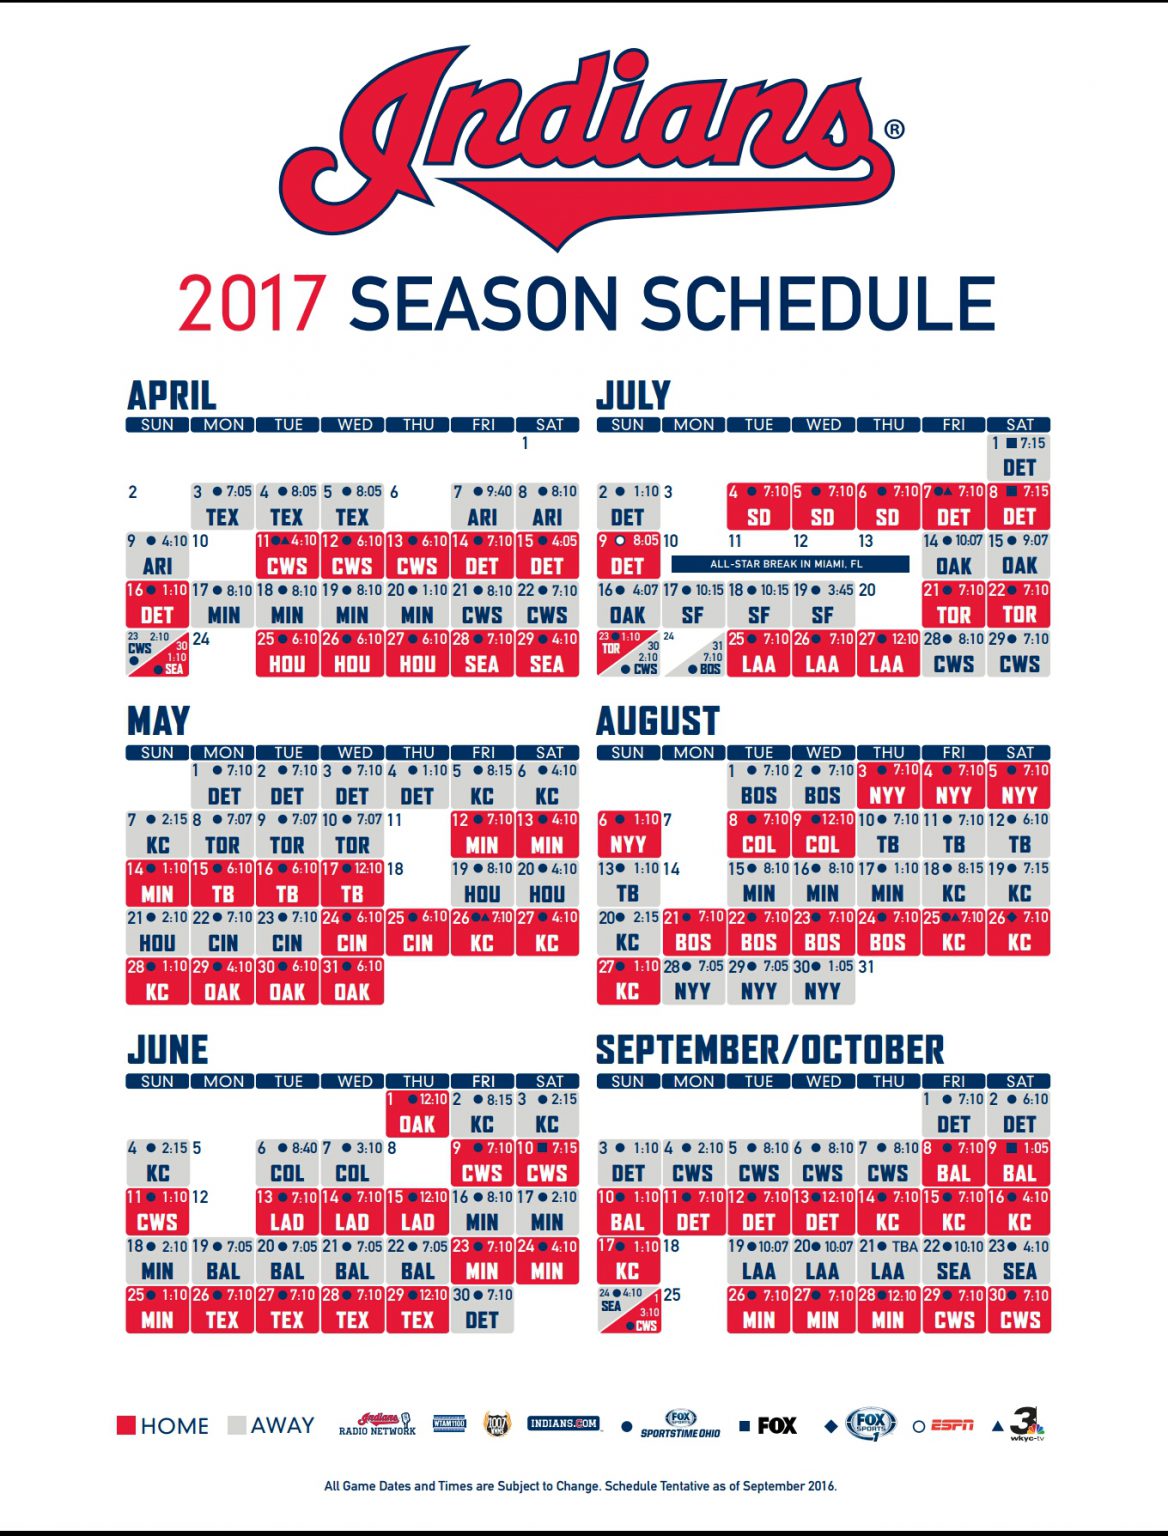 Cleveland Indians Announce Game Times and Broadcast Schedule for 2017